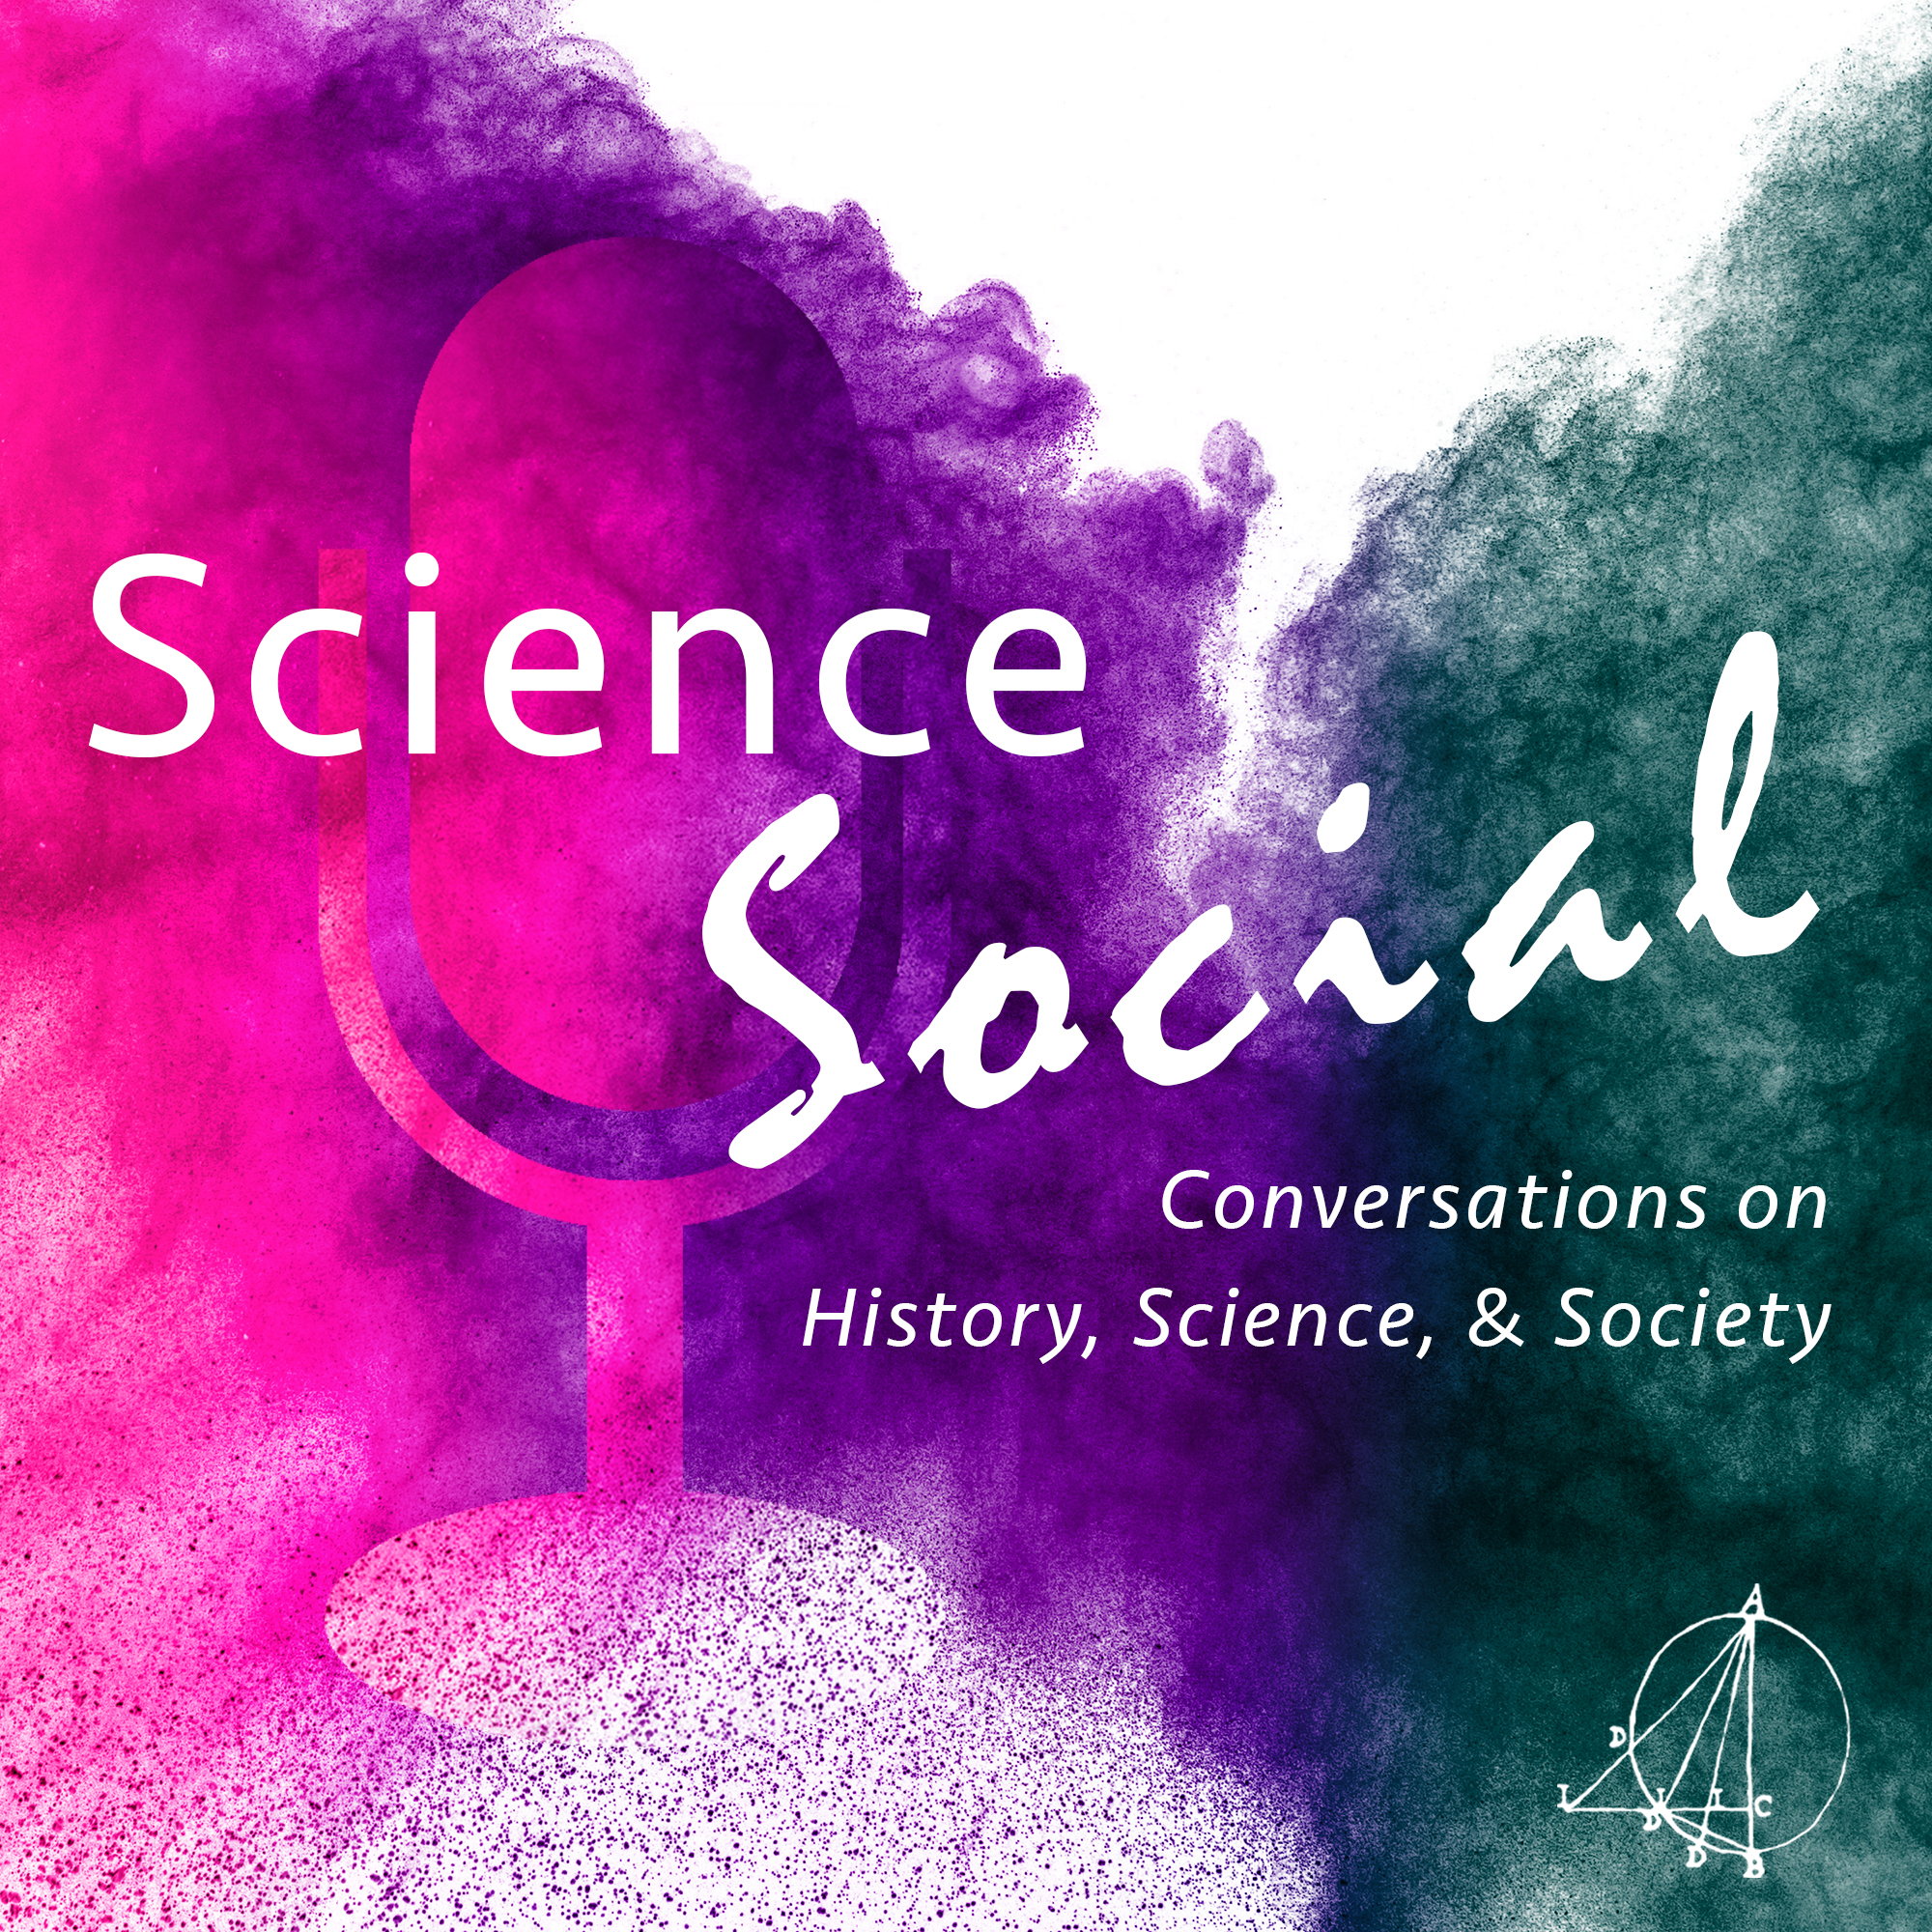 Special Episode: There Is No One History of Science (But It’s All Interconnected)